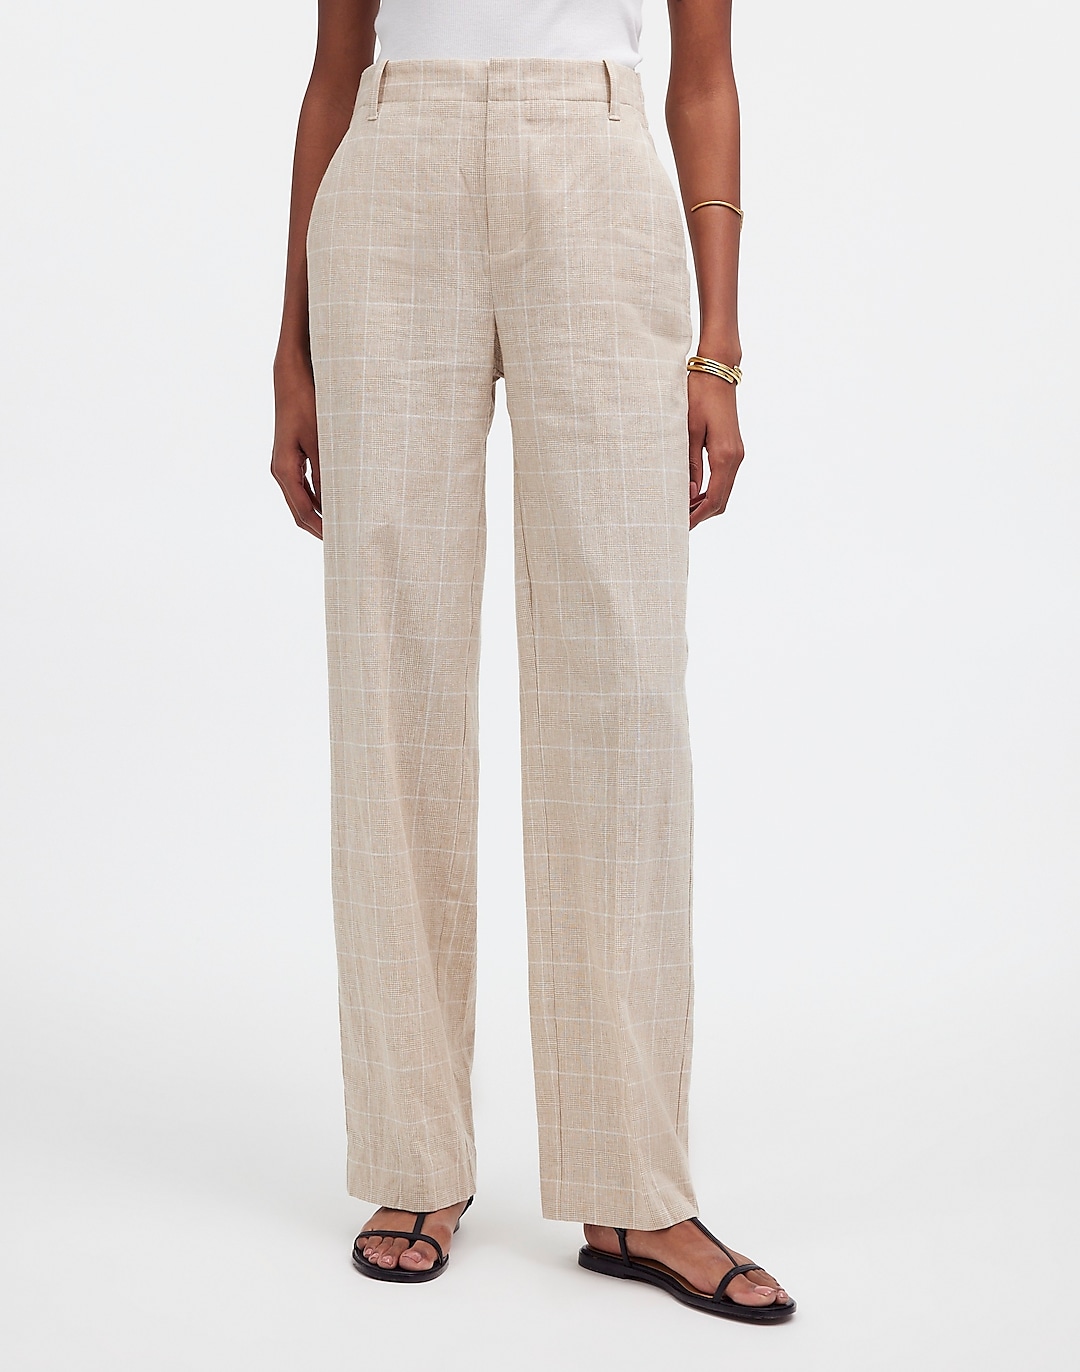 Slouchy Straight Pants in Plaid | Madewell